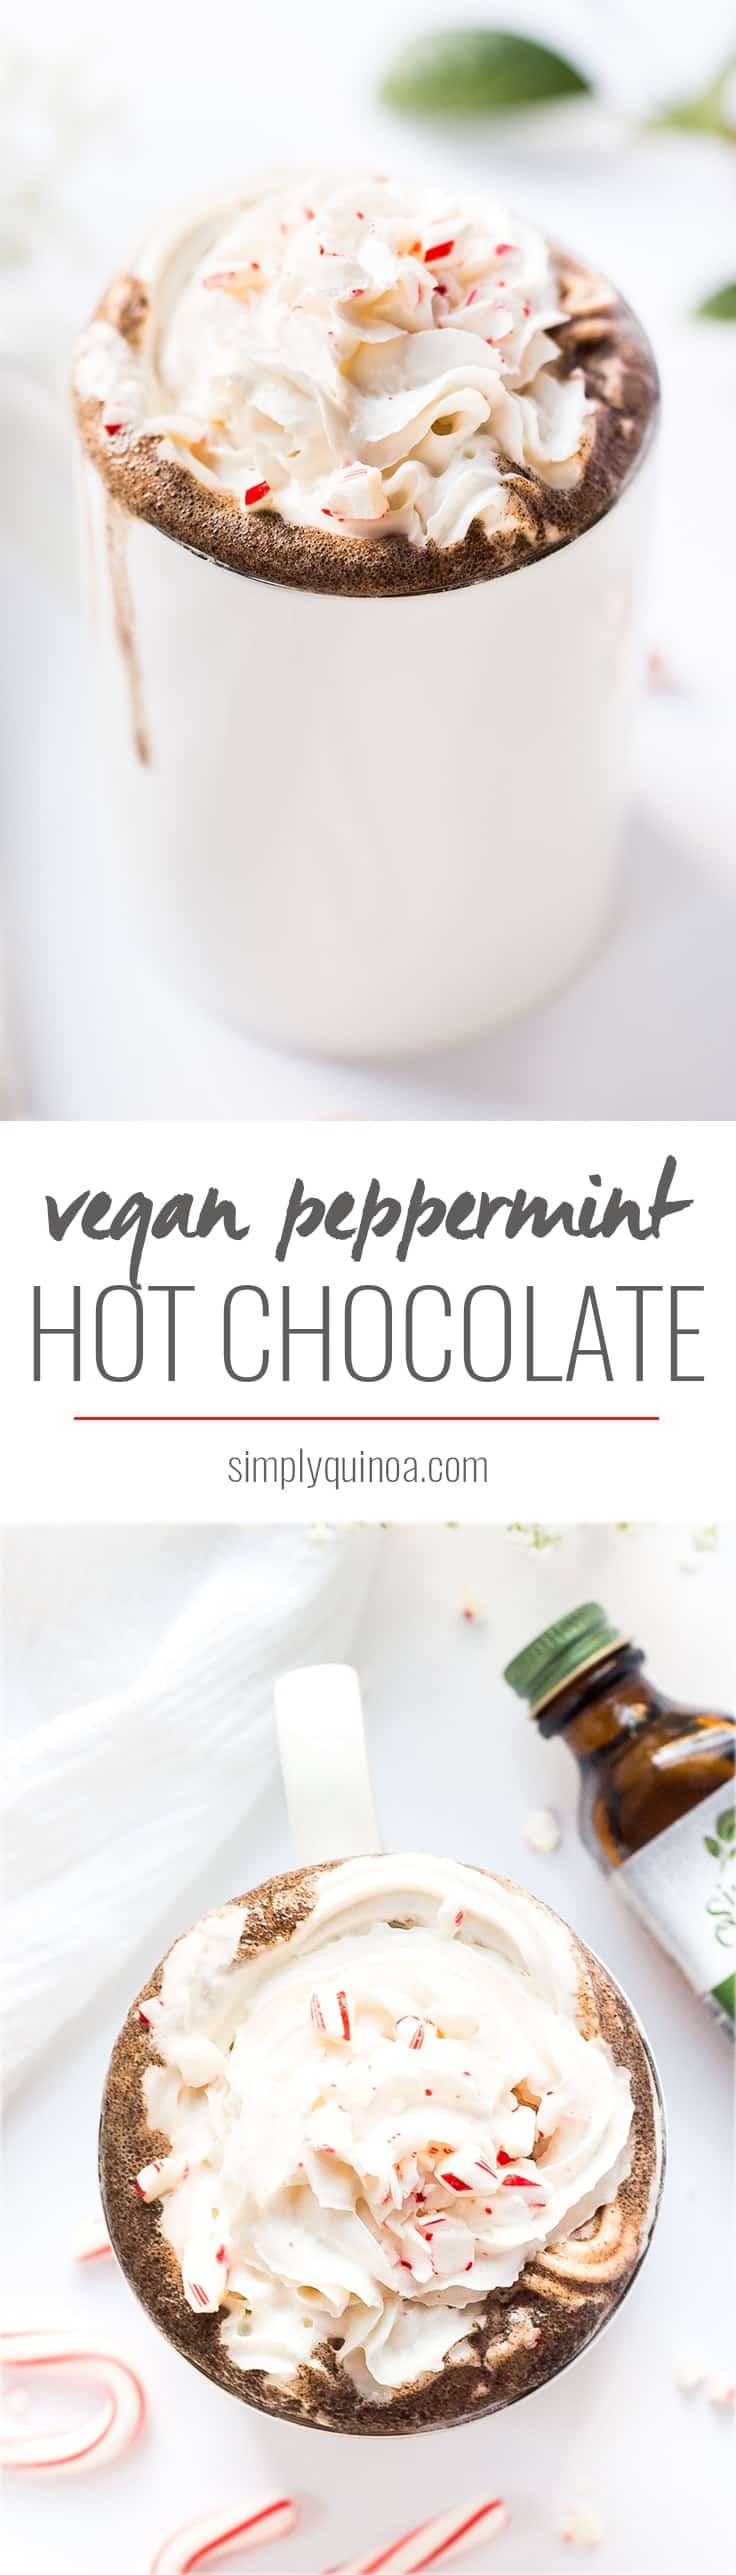 This creamy VEGAN Peppermint Hot Chocolate is so simple to make, takes just 2 minutes and is naturally sweetened!